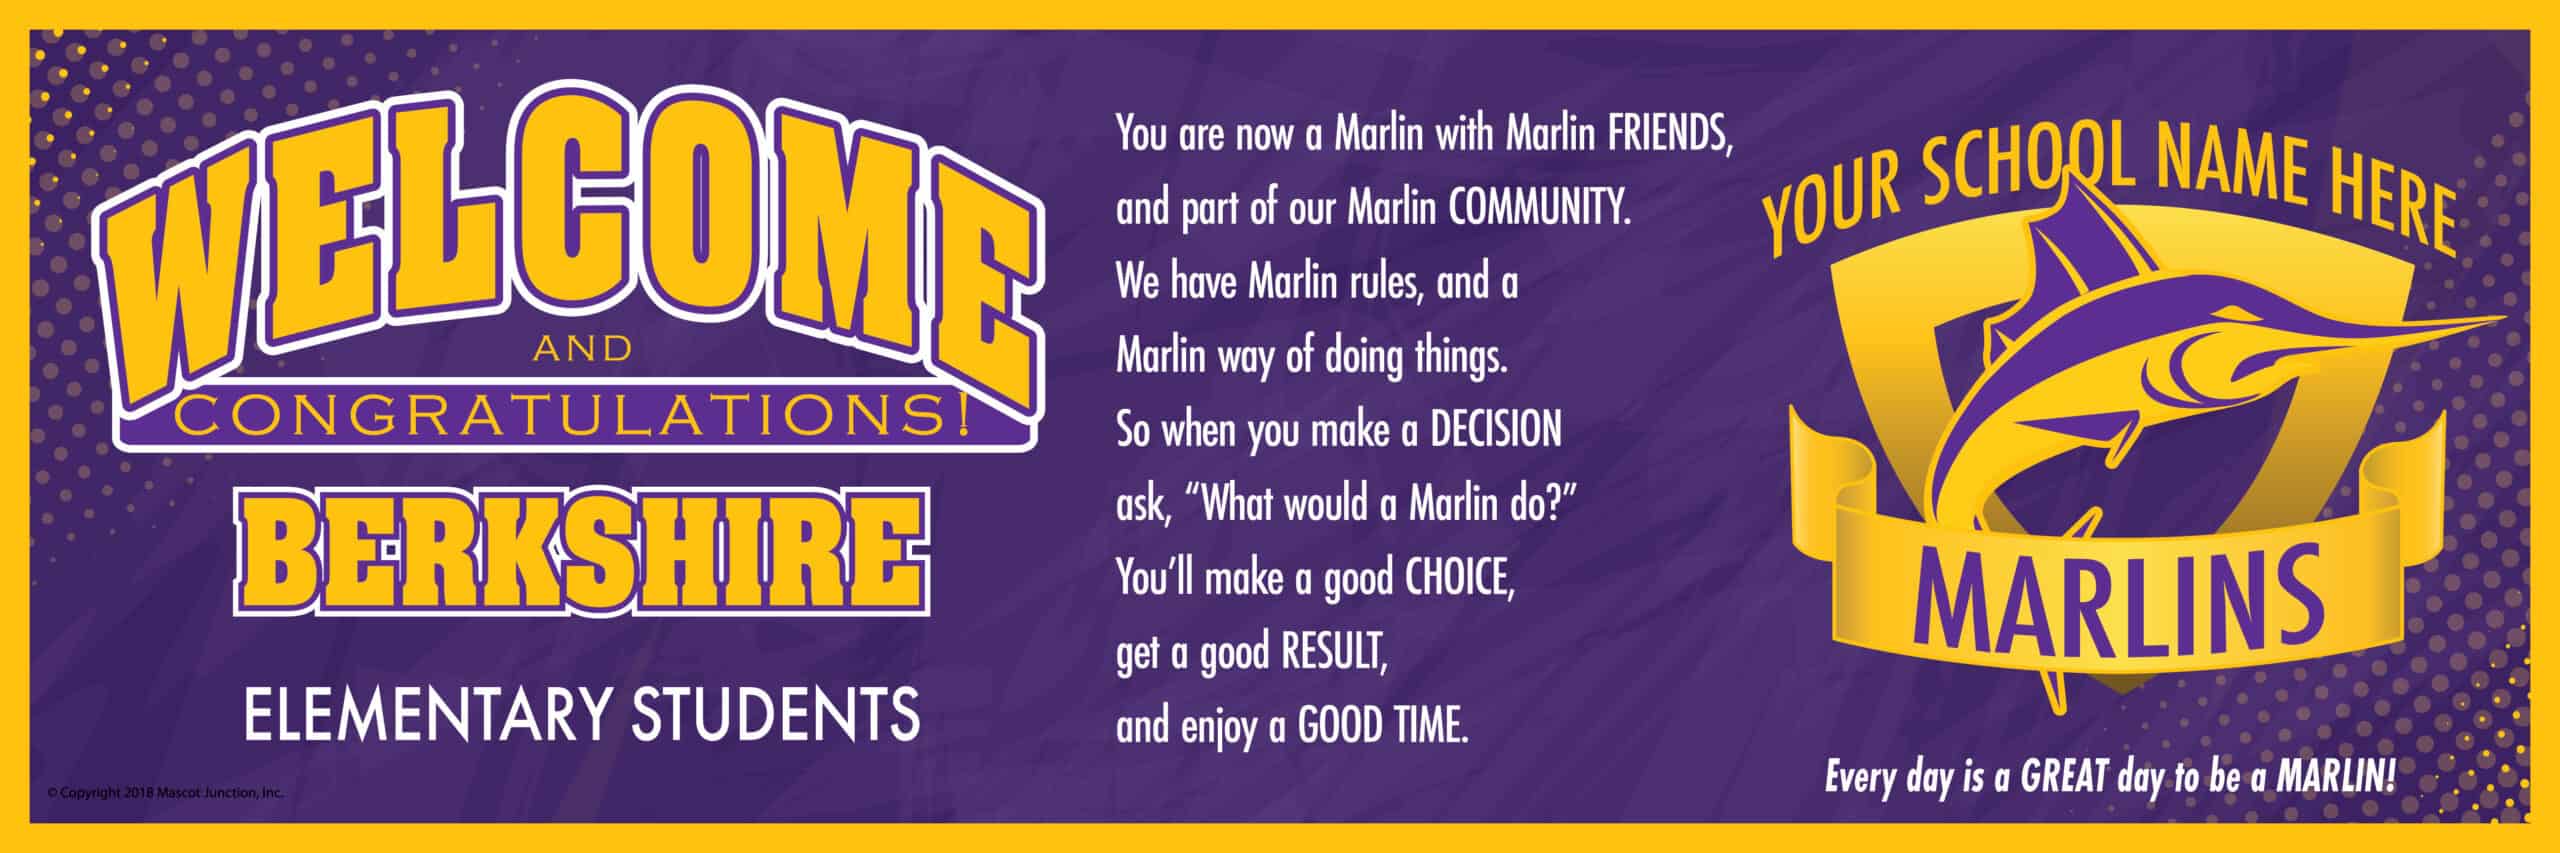 Welcome-message-Banner-Marlin